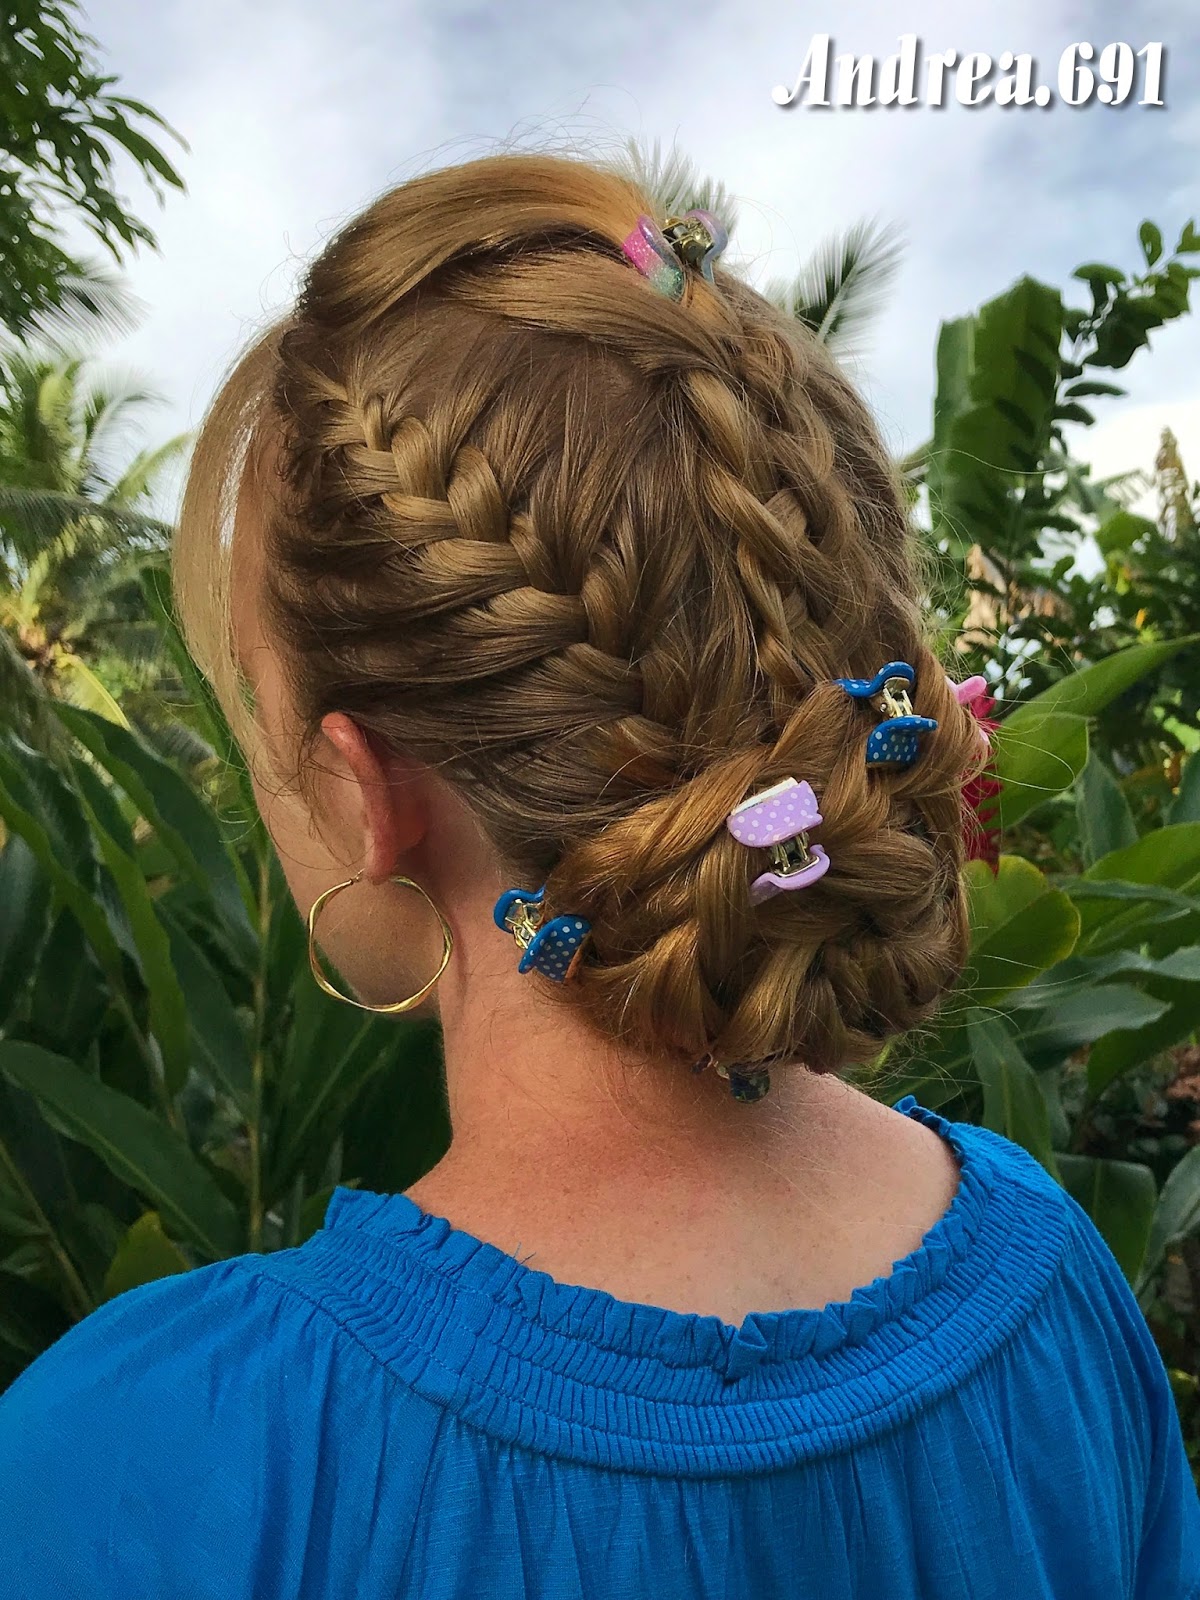 How to do any hairstyle in 5 minutes from French braids to beachy waves |  The US Sun